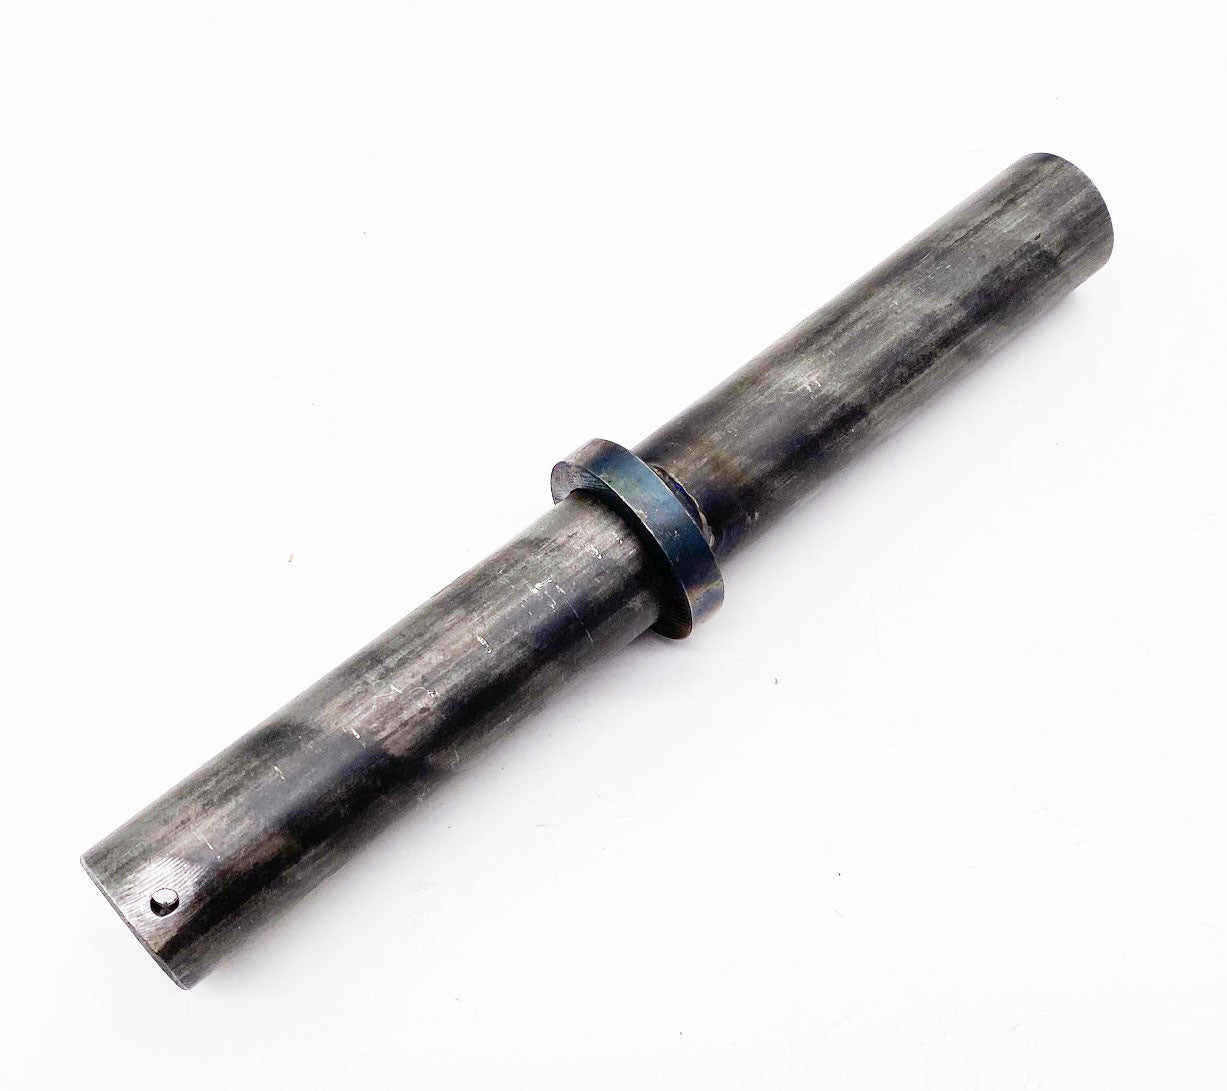 Pedal Shaft for Clutch and Brake, 1956-1963, Willys Pick Up Truck, Station Wagon, and Sedan Delivery - The JeepsterMan